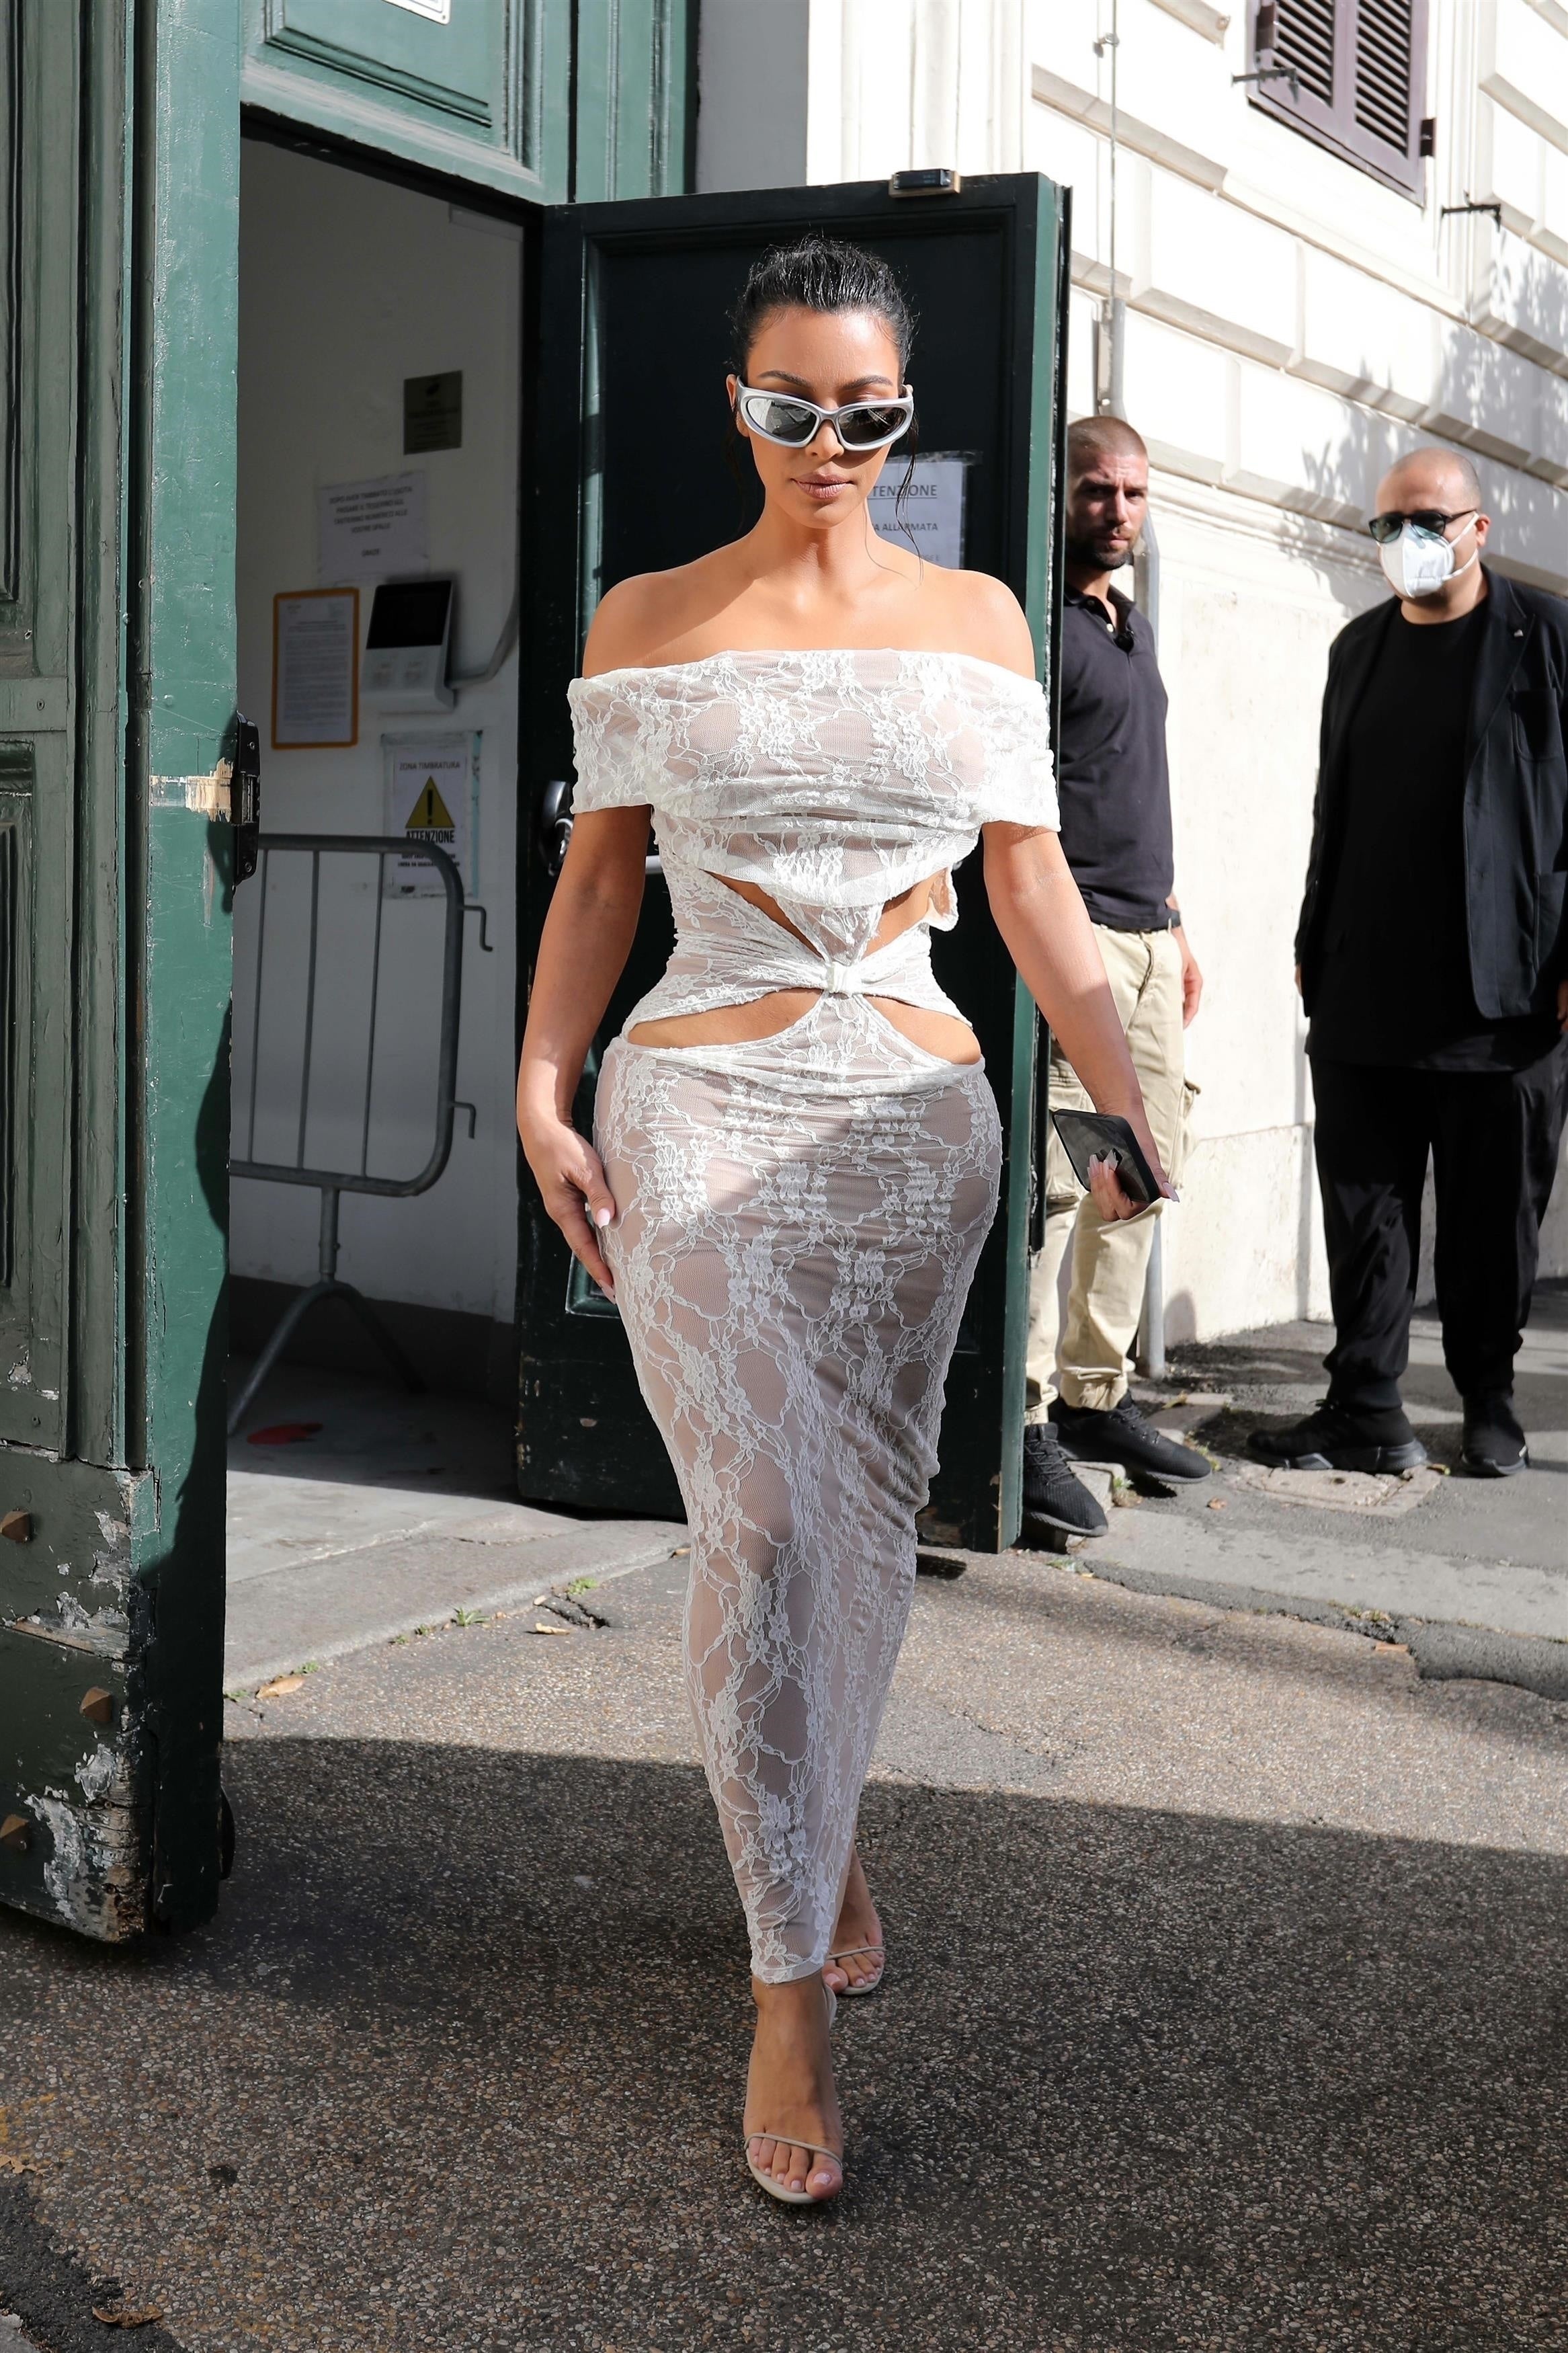 Kimberly Moss Porn Legs Heels - Kim Kardashian Wears Lace Cut-Out Dress for Visit to the Vatican With Kate  Moss | Entertainment Tonight